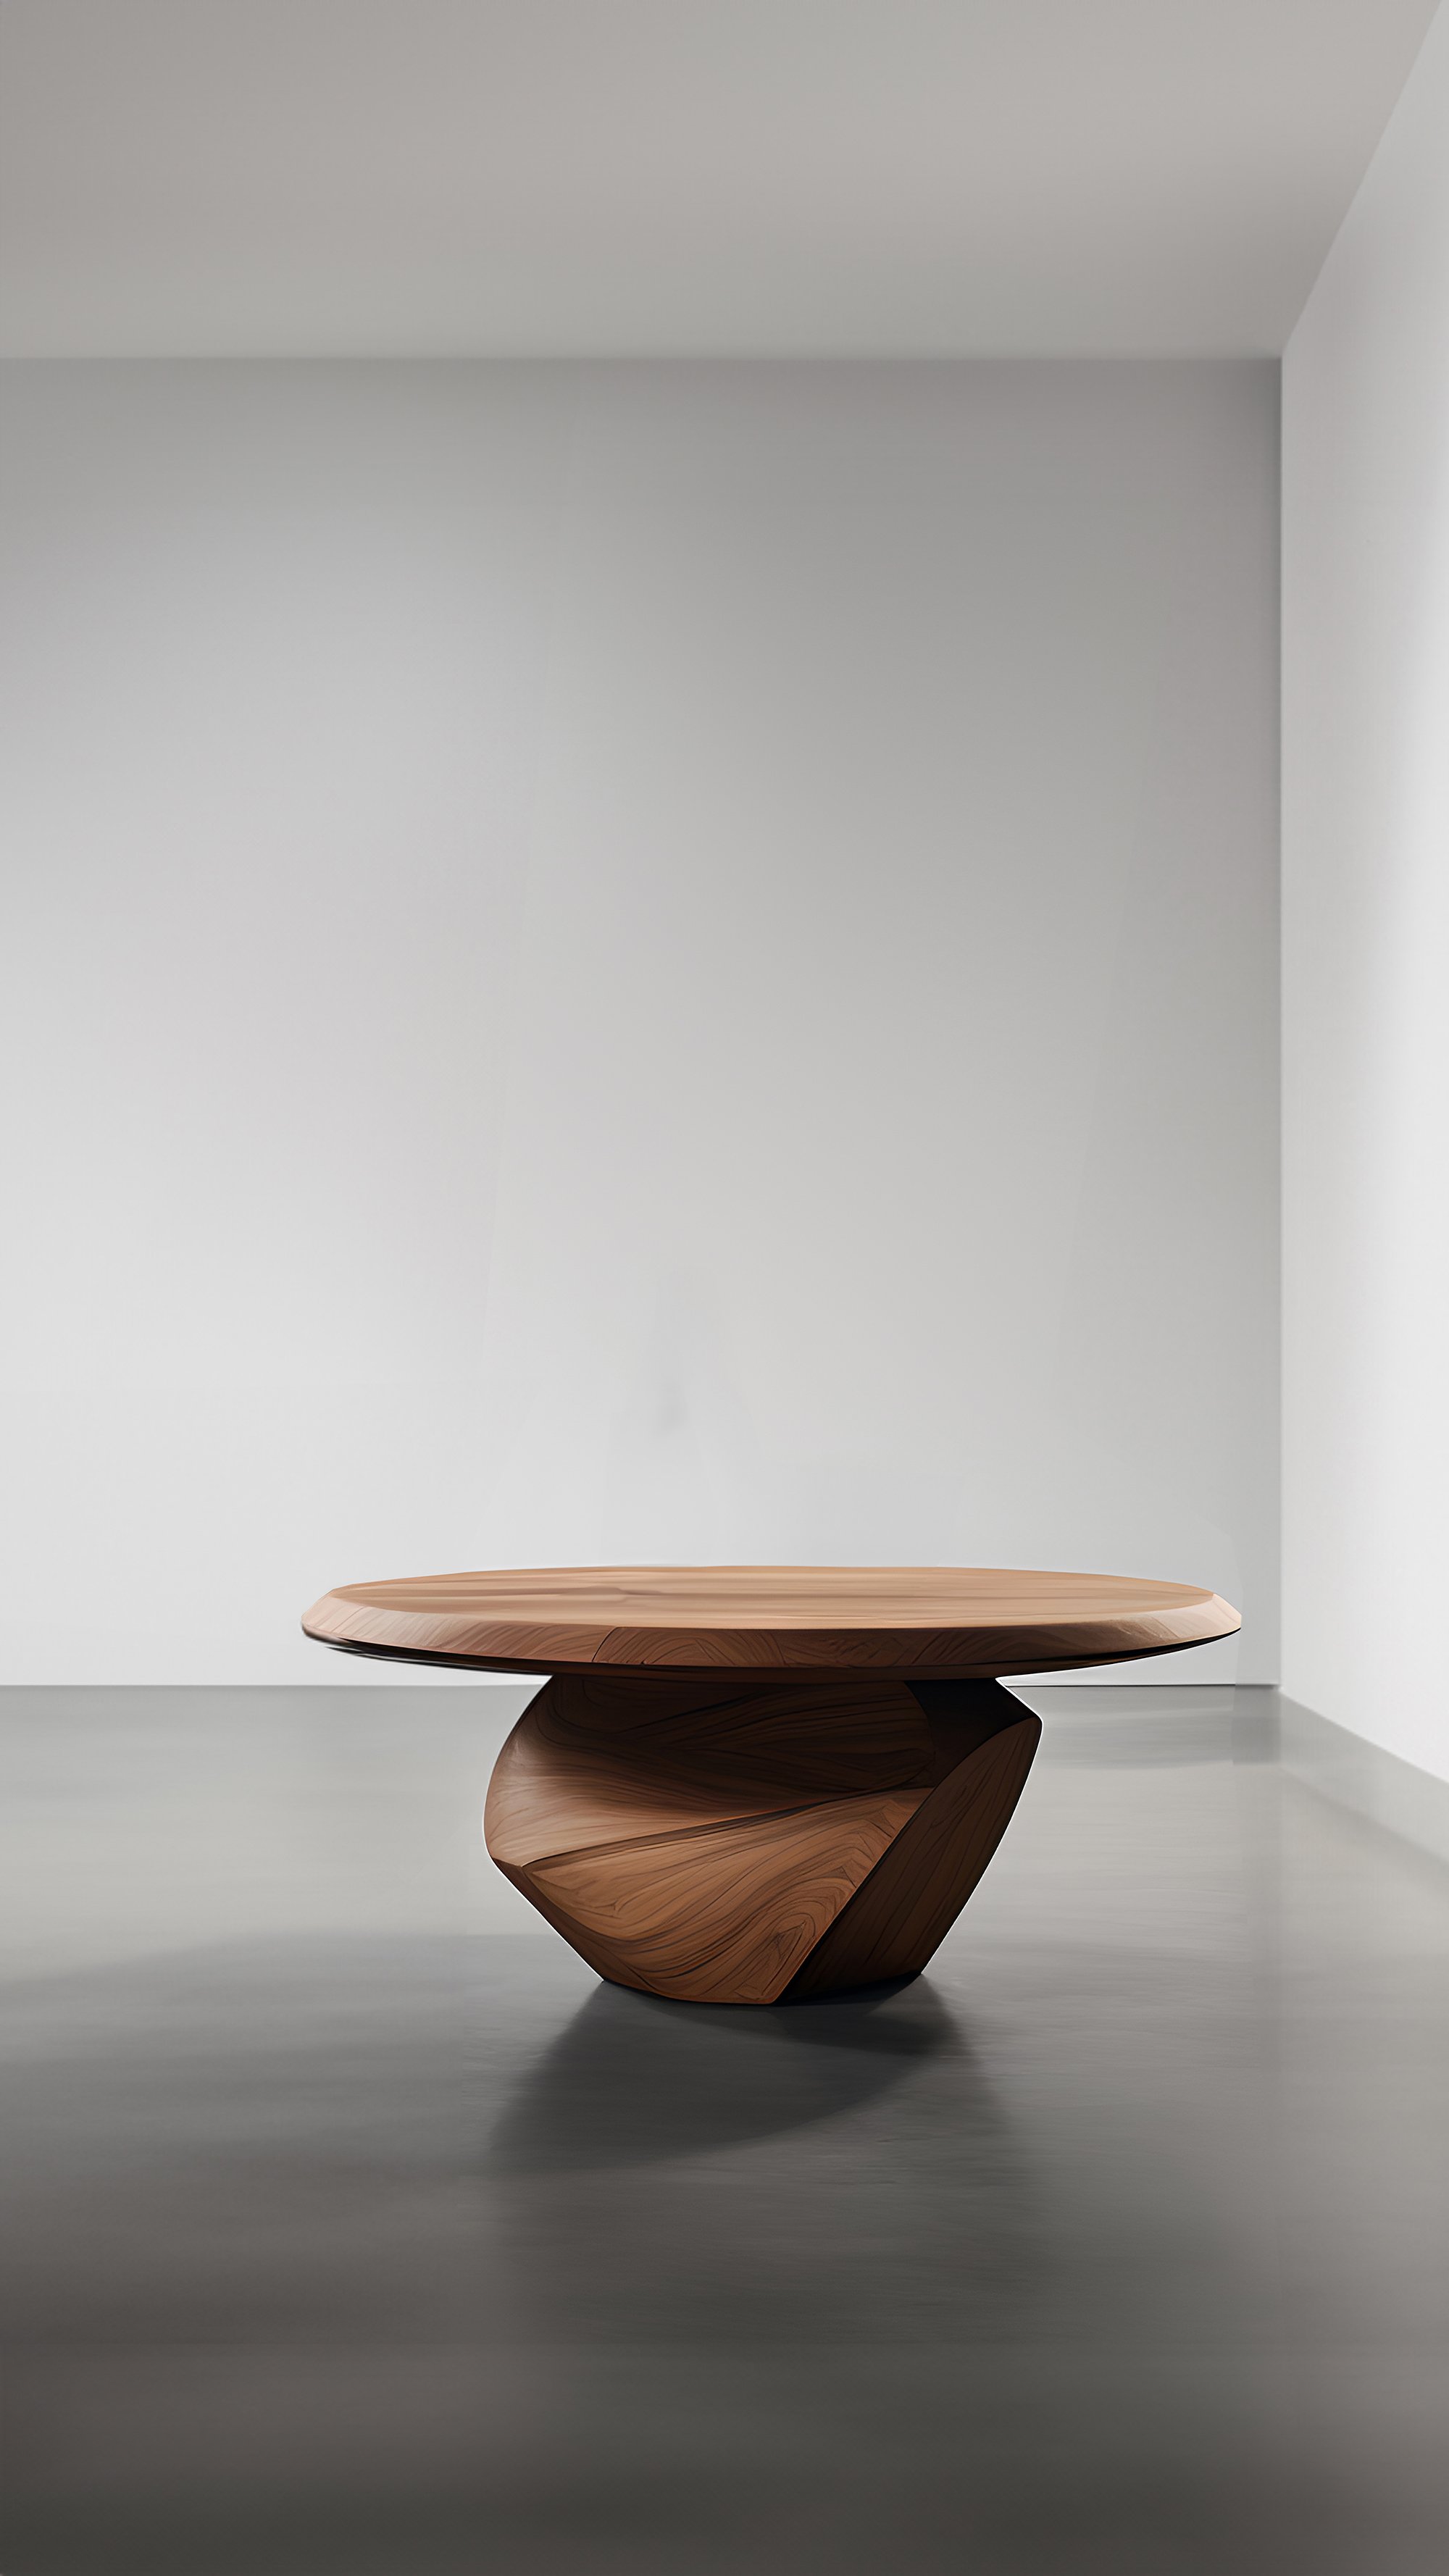 Sculptural Coffee Table Made of Solid Wood, Center Table Solace S37 by Joel Escalona — 6.jpg